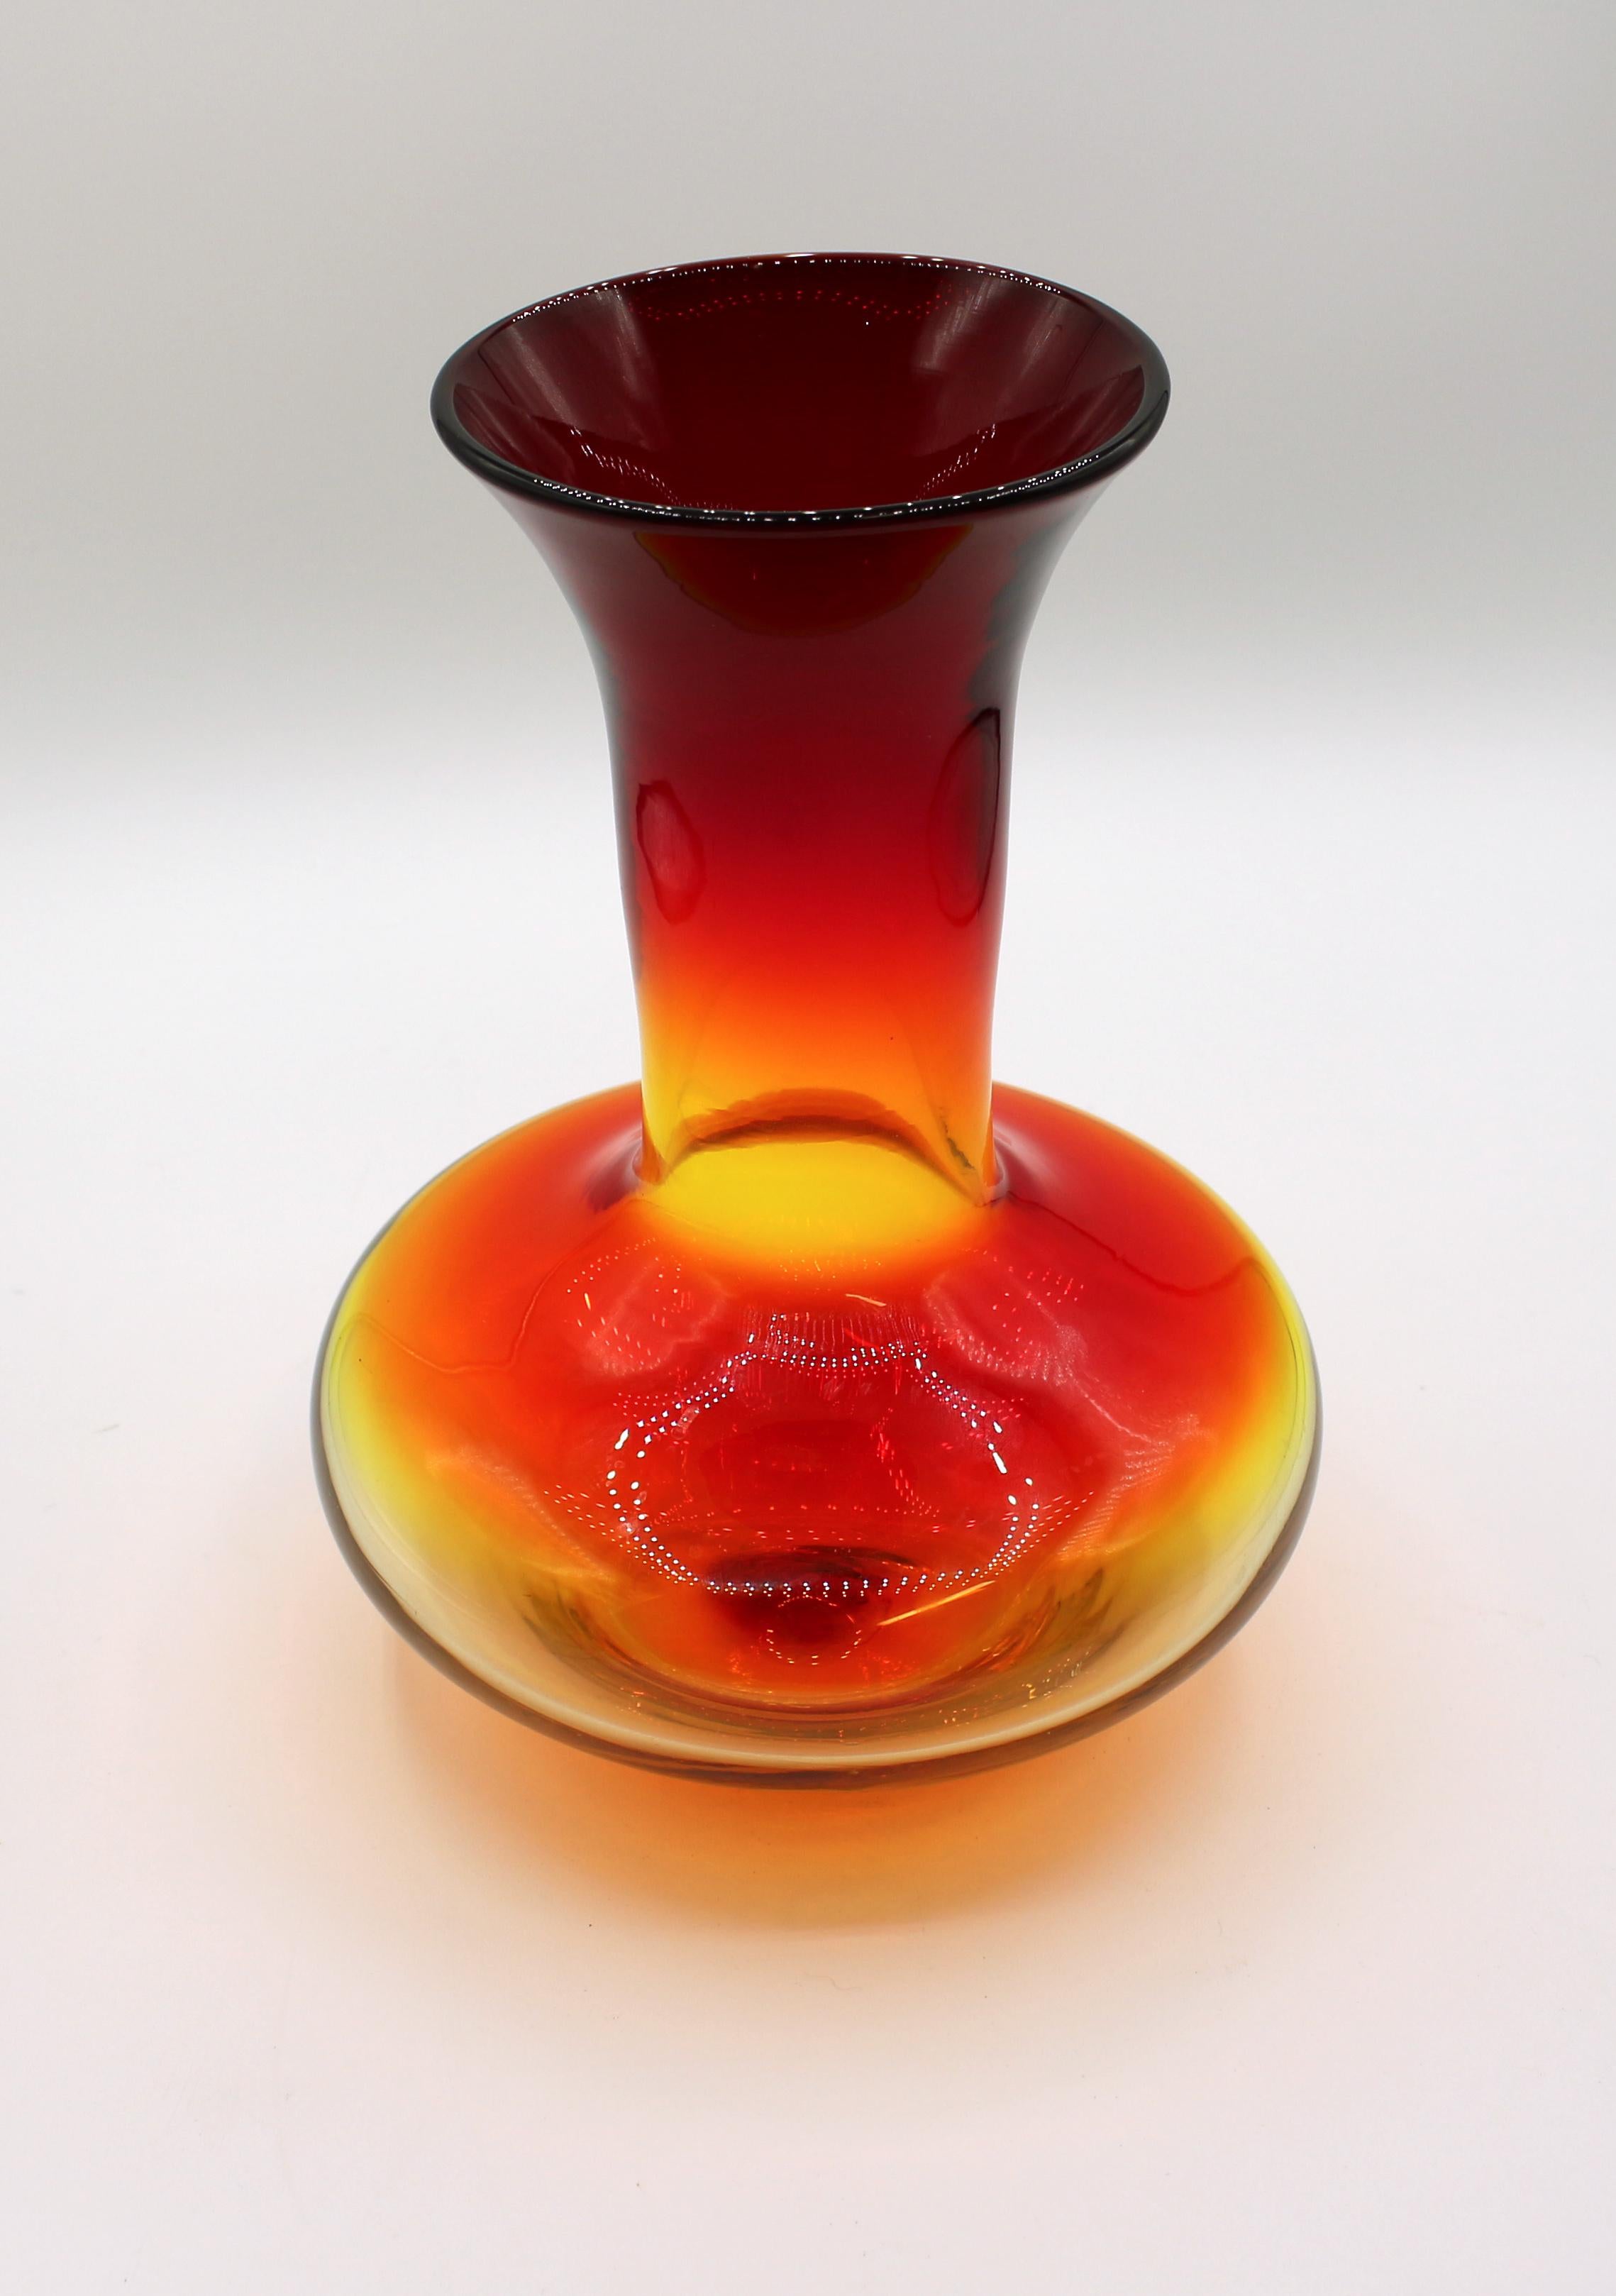 2003 Blenko artist signed hand blown glass carafe for wine or flowers. Amberina which glows orange to yellow/green. Measures: 9 3/4